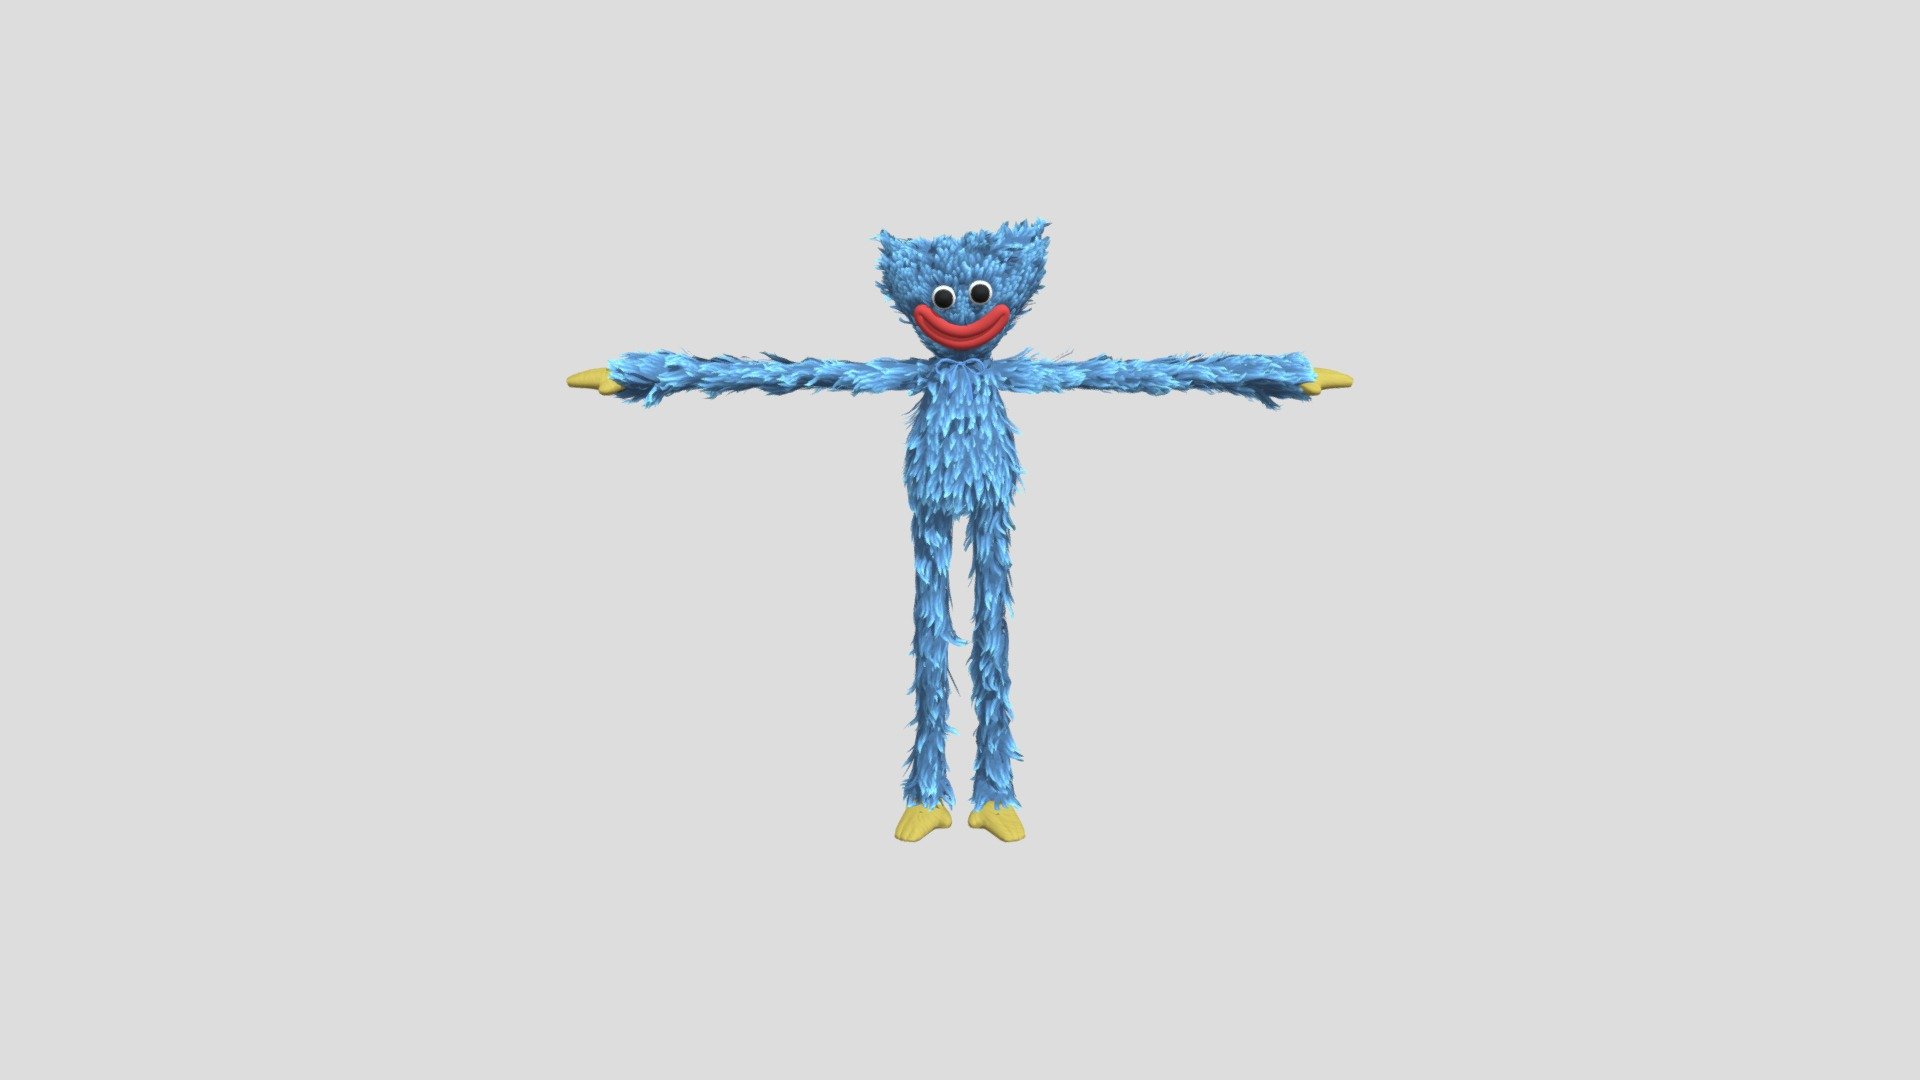 Huggy Wuggy - A 3D model collection by SpotFlounder241 - Sketchfab